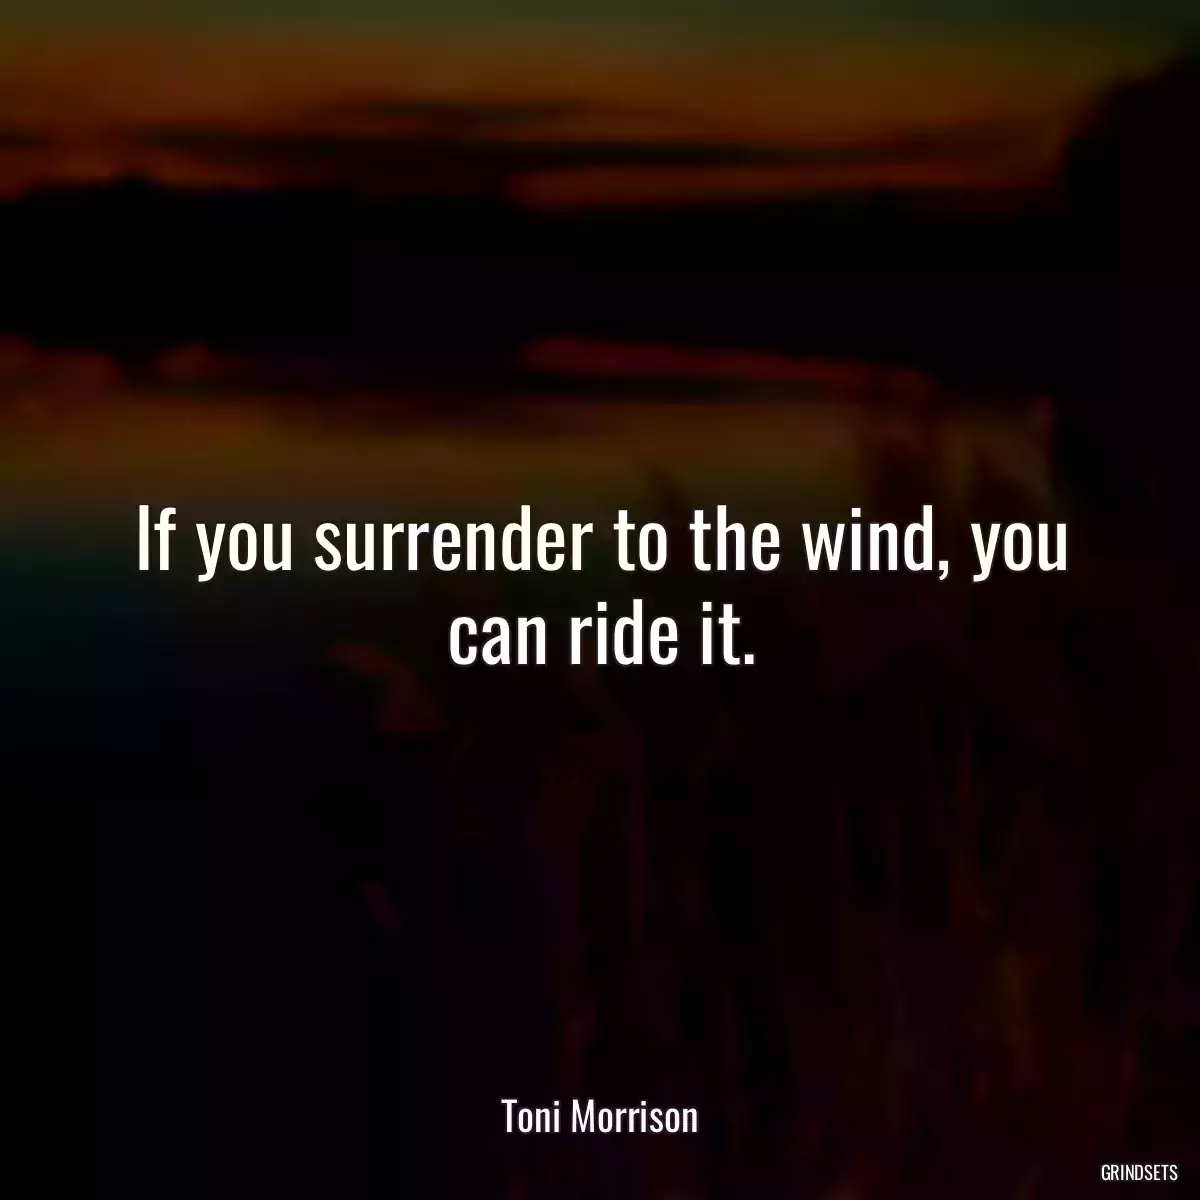 If you surrender to the wind, you can ride it.